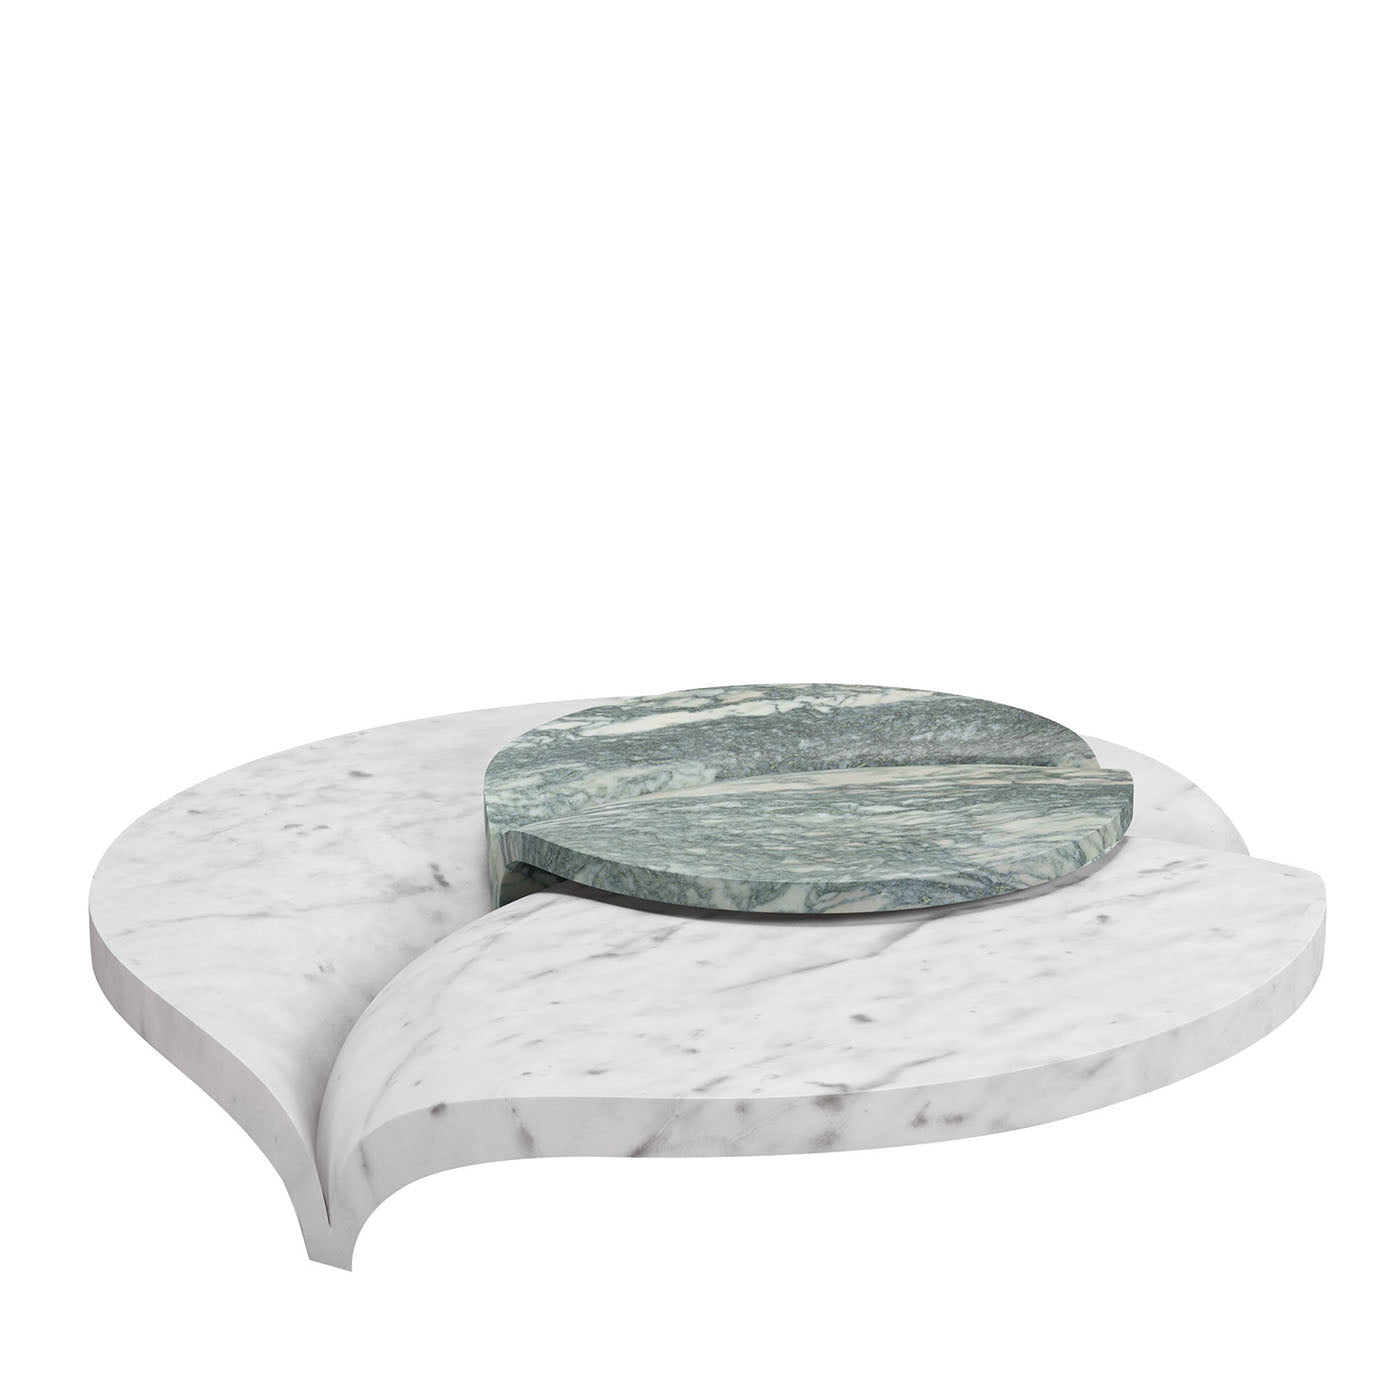 Luna Table in Green Luana and White Carrara Marble - Main view